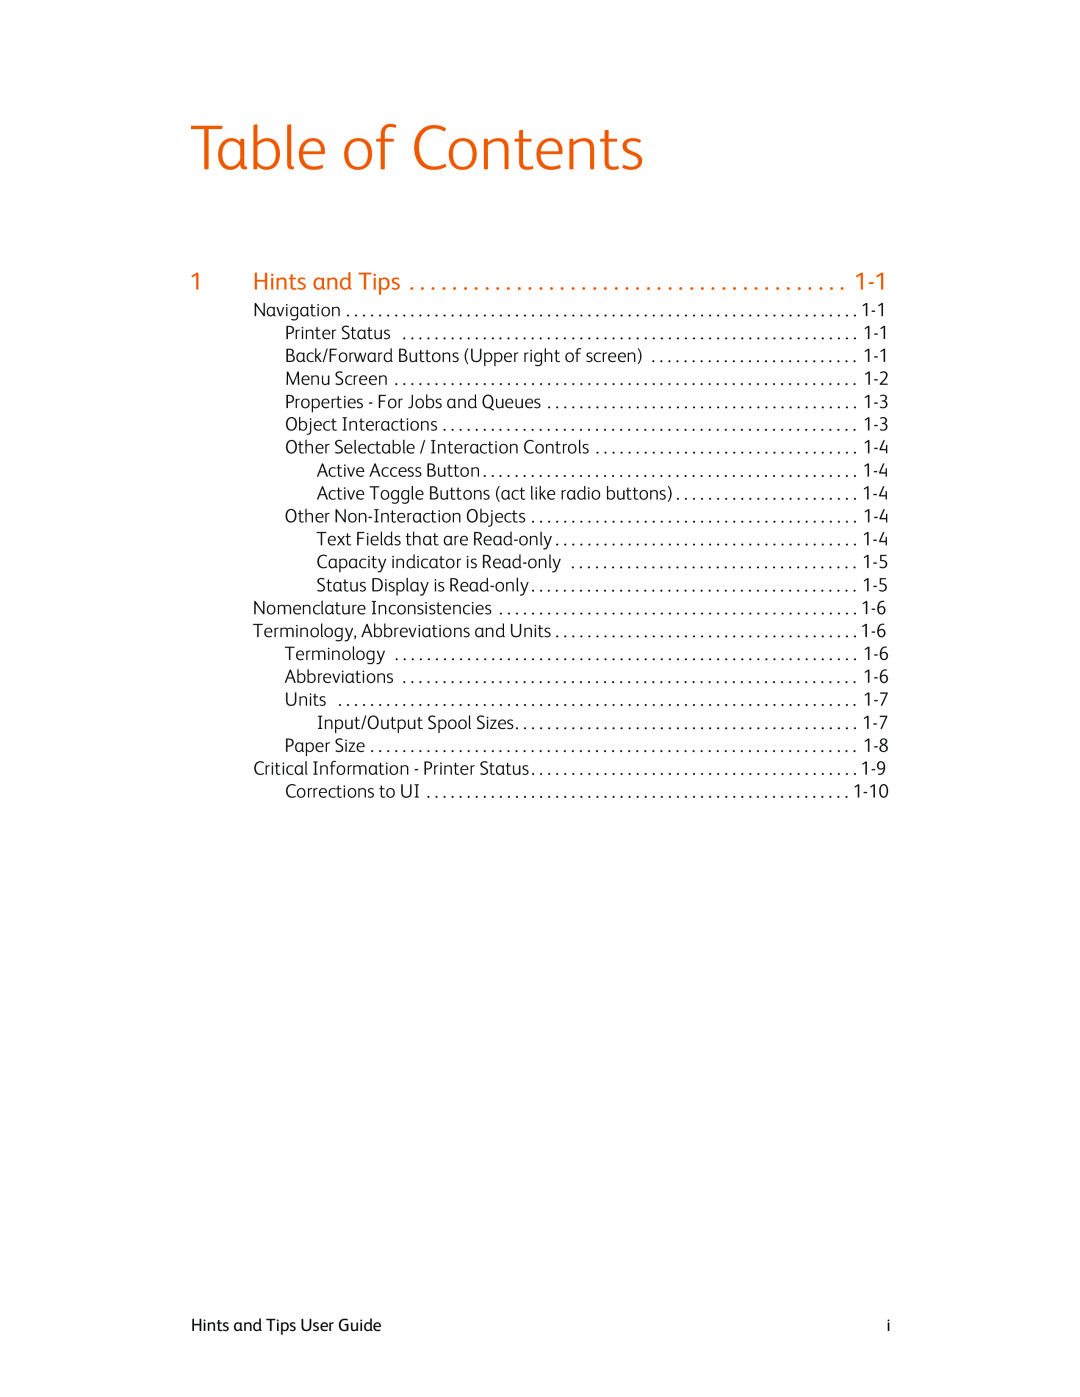 Xerox 980 manual Table of Contents, Hints and Tips User Guide 